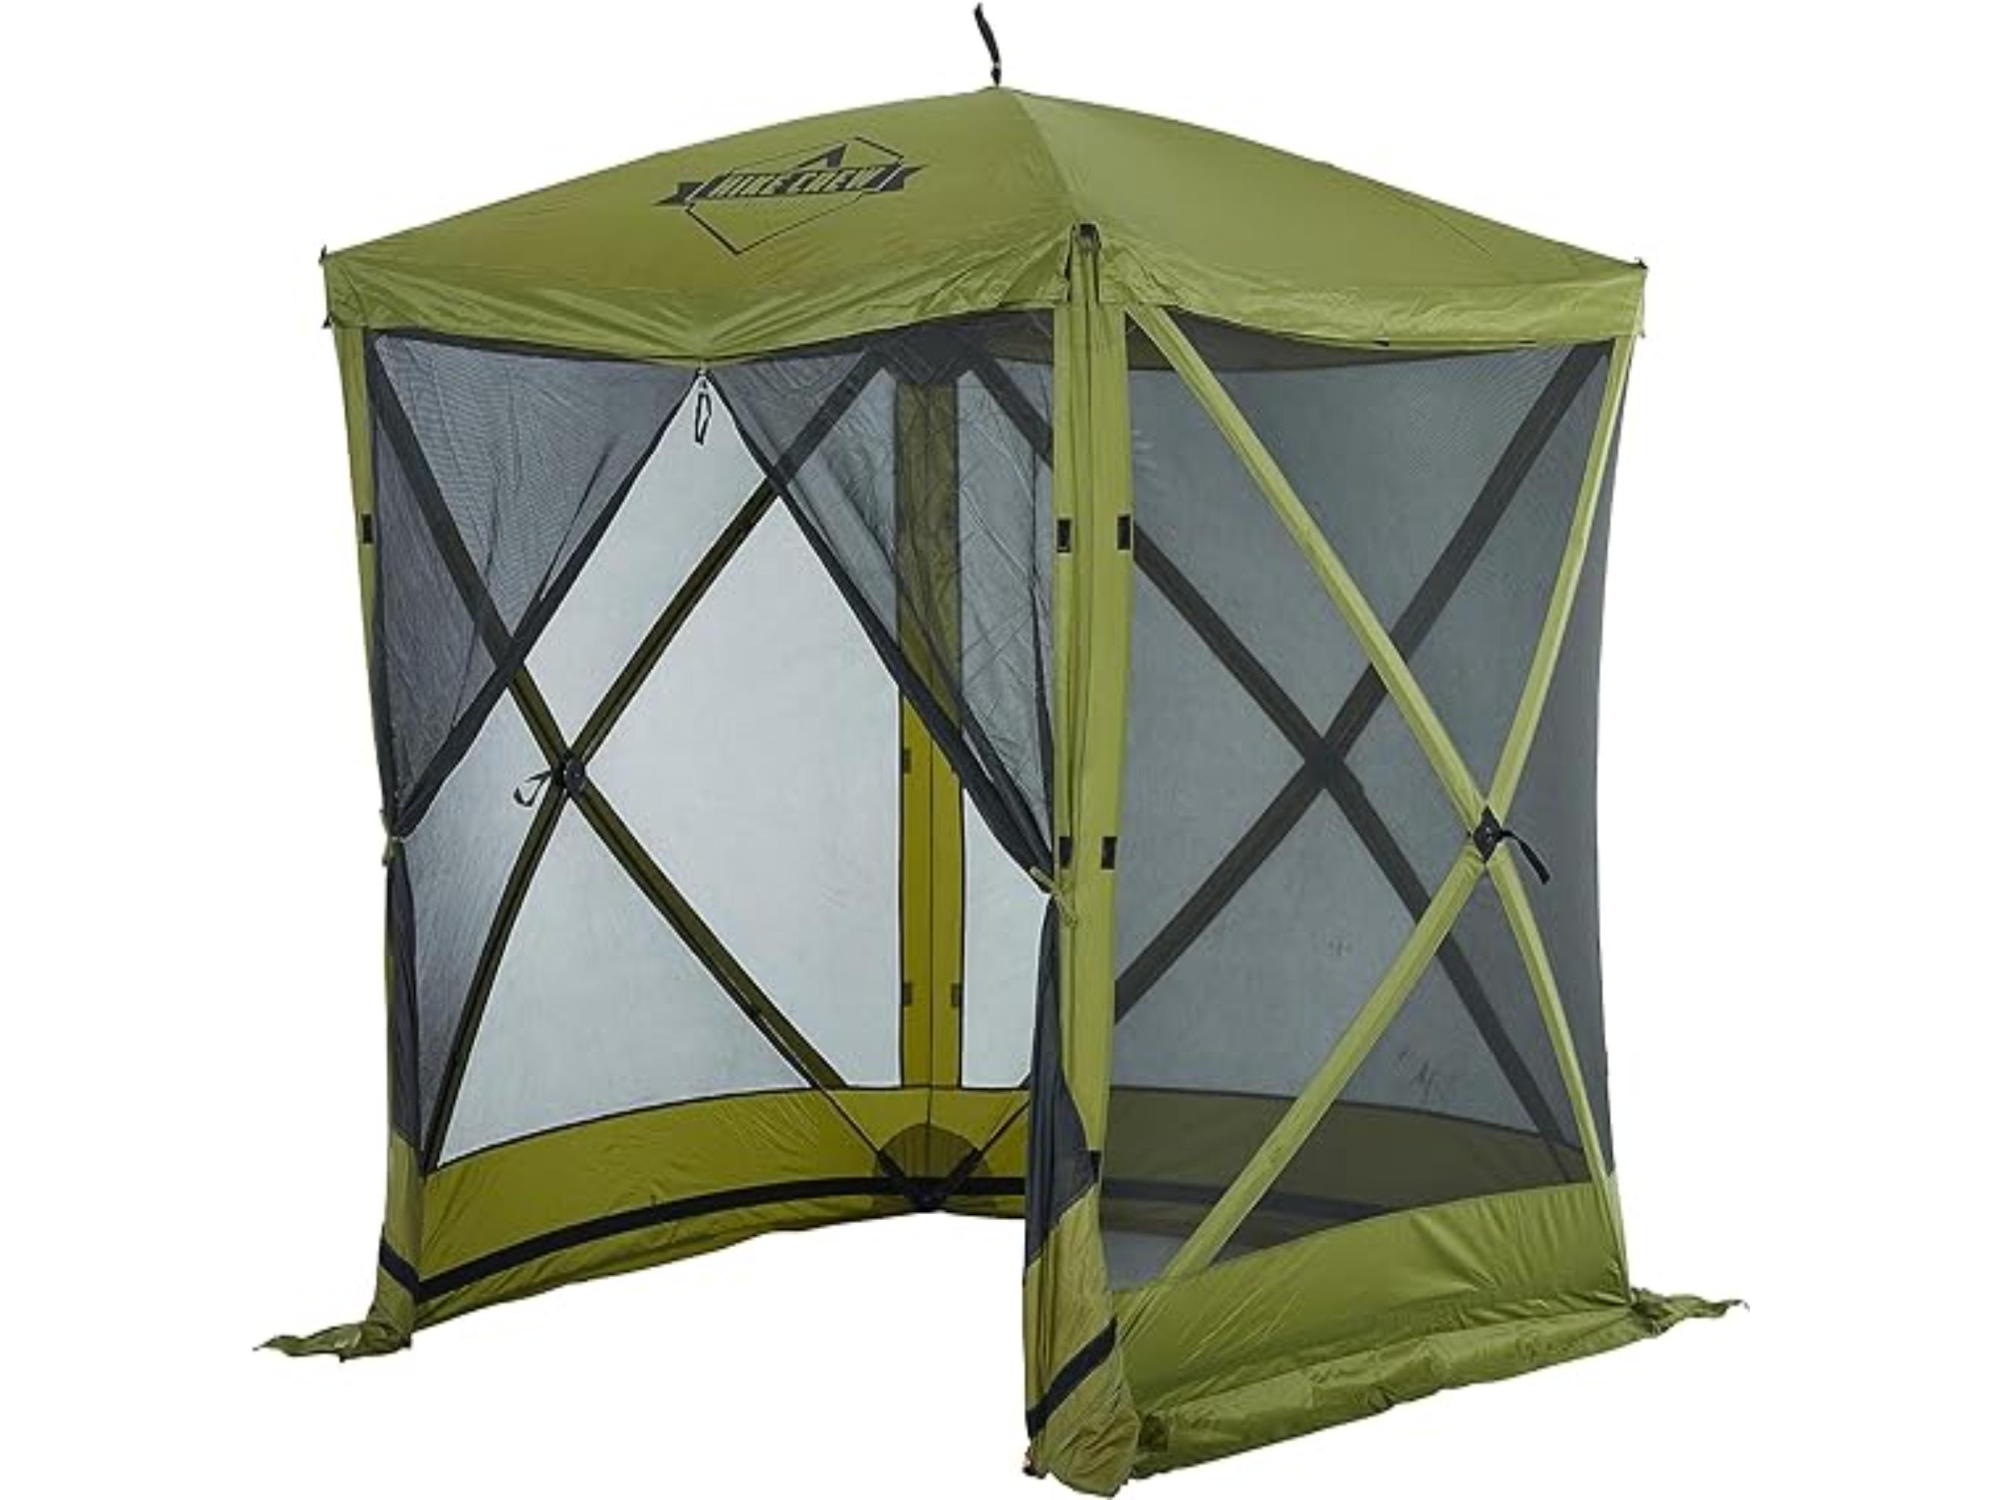 Hike Crew 6 x 6 Pop Up Gazebo Tent, 4-Sided Outdoor Tent Canopy, Green